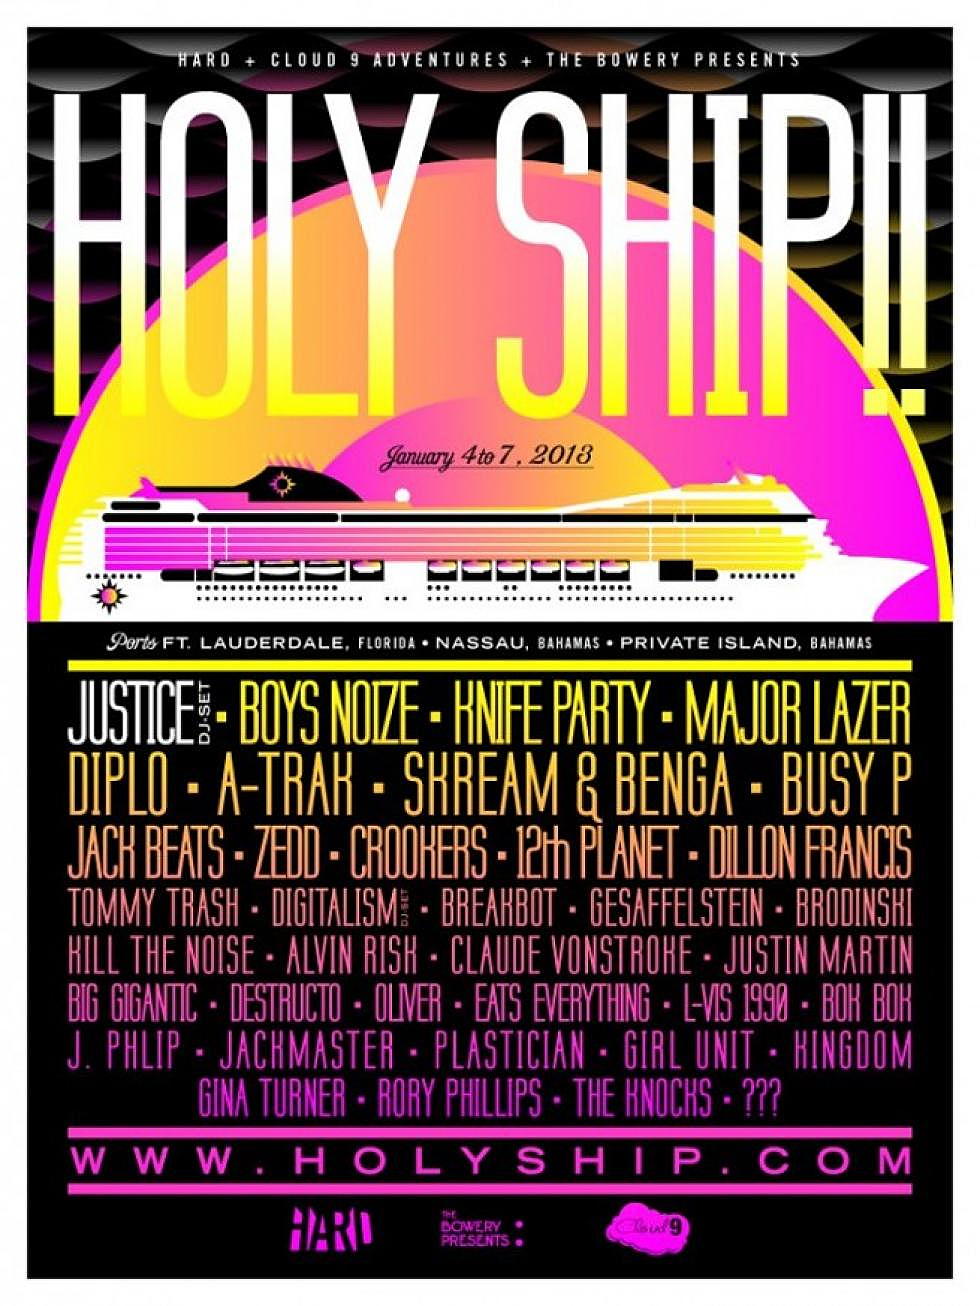 Holy Ship 2013 Lineup Announced